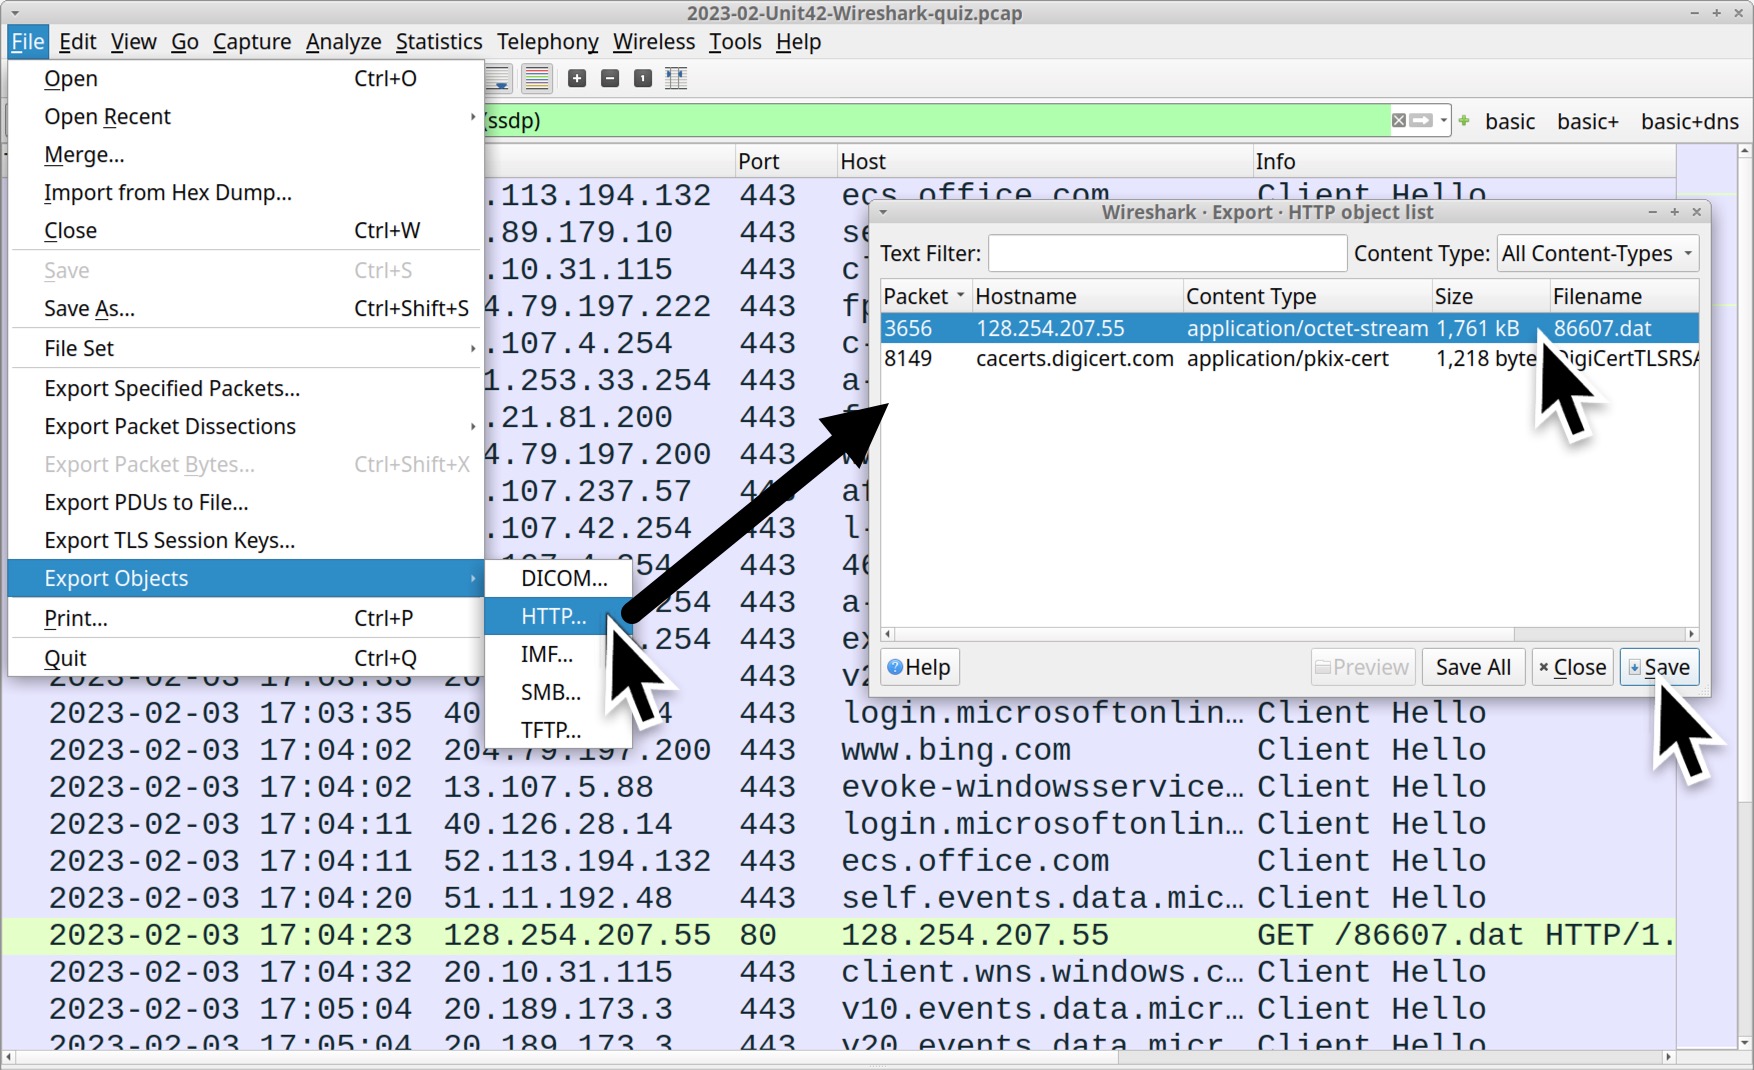 Image 5 is a screenshot of Wireshark shows the process of exporting an HTTP object from the File menu. 